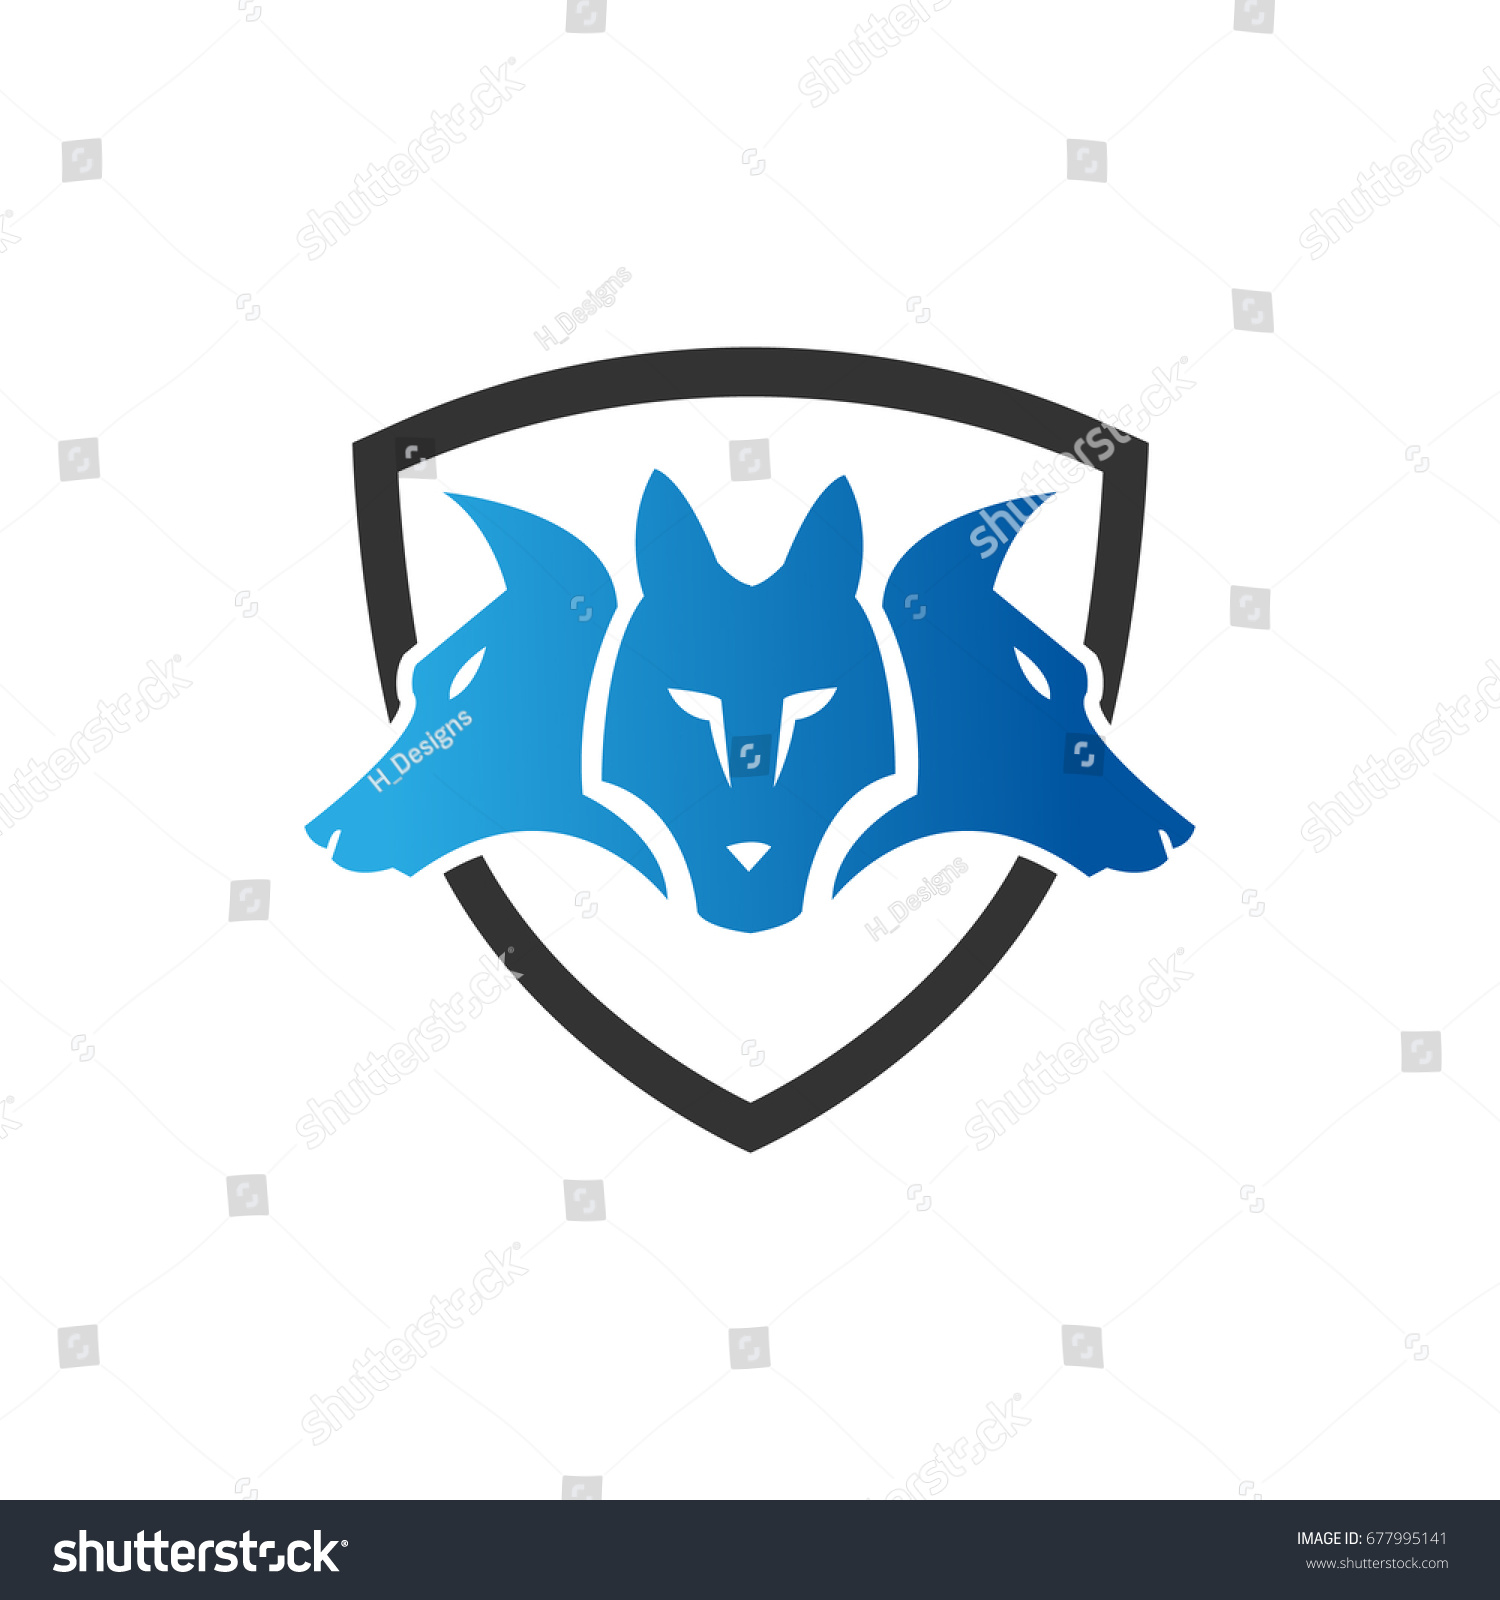 SVG of Cerberus icon , three head dog icon. Mythical animal of old times. Designed in vector format. svg